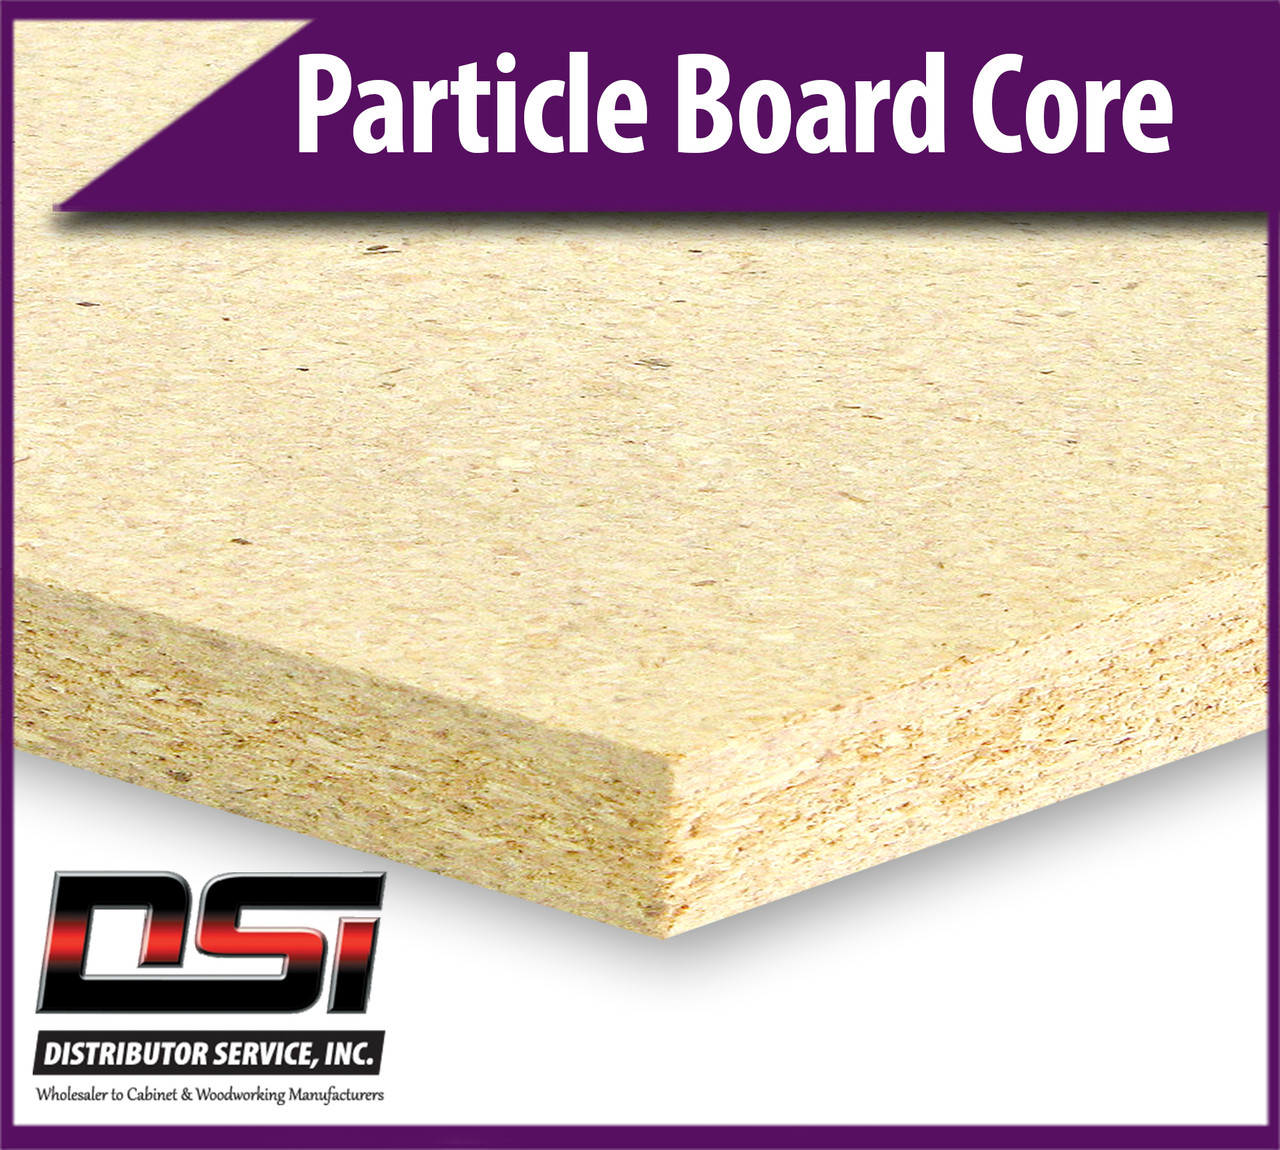 Particle Board Core 3/4" x 49" x 145" Industrial Particleboard Panels